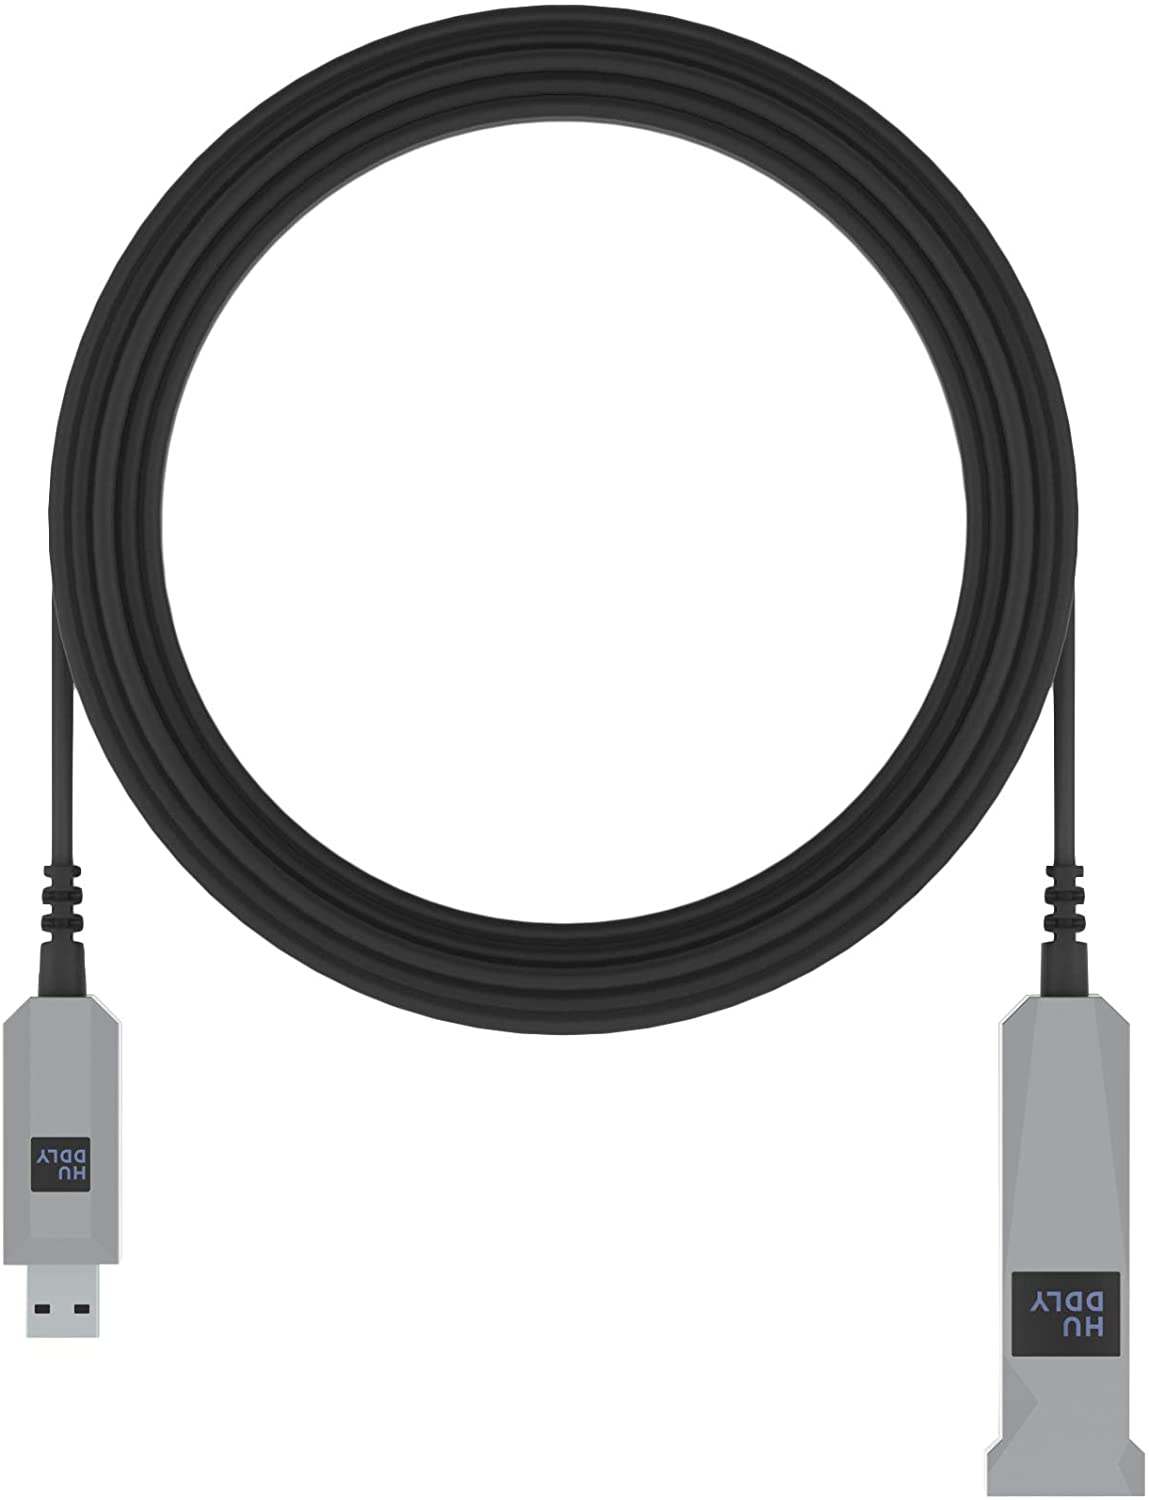 Huddly USB 3.0 type A (Male) to USB type A (Female) Active Optical Cable